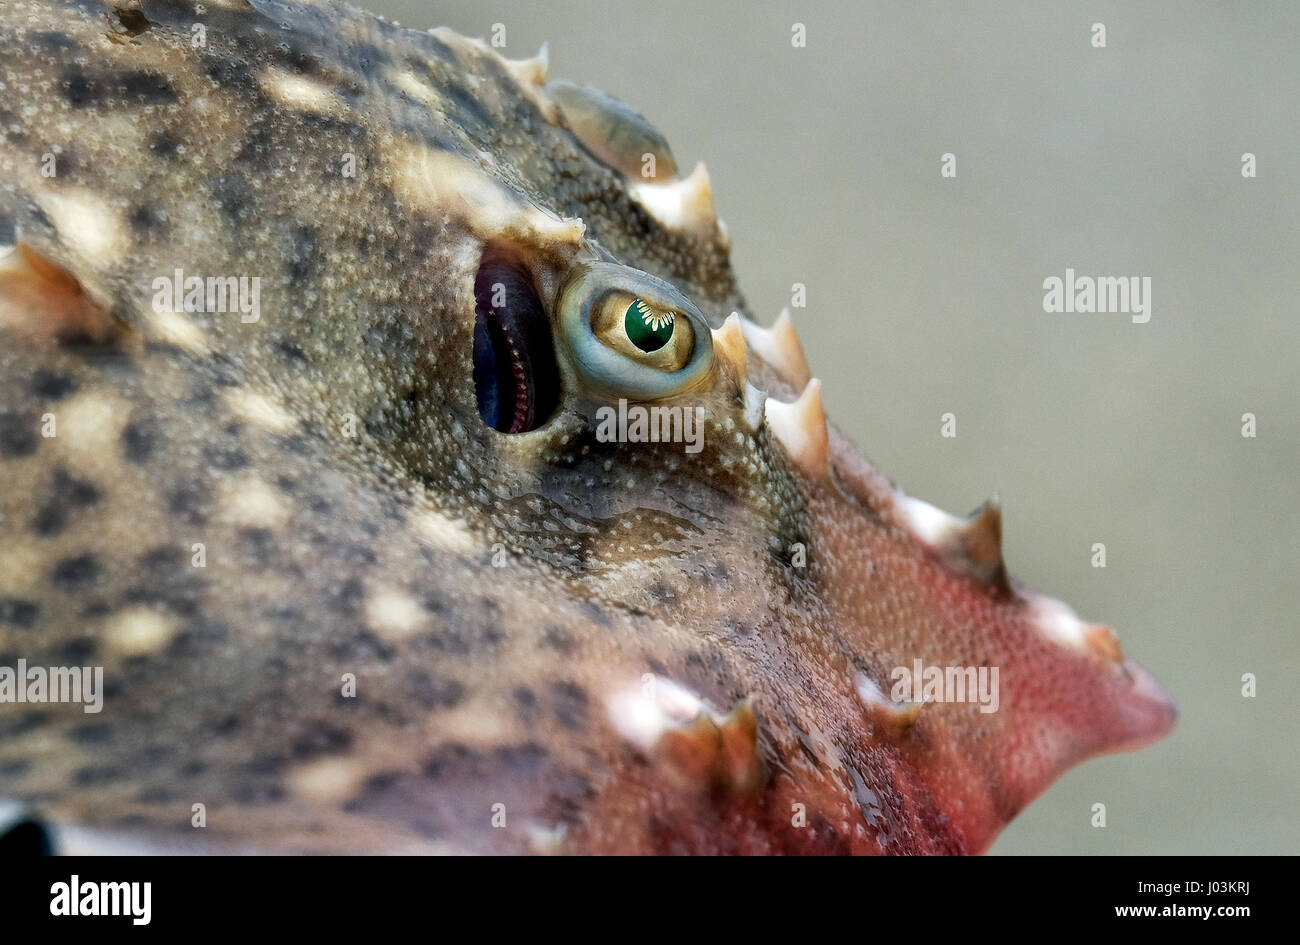 Close shot of eye of a Common Skate caught from Bridlington pier. Edible sea fish common in UK waters. Stock Photo